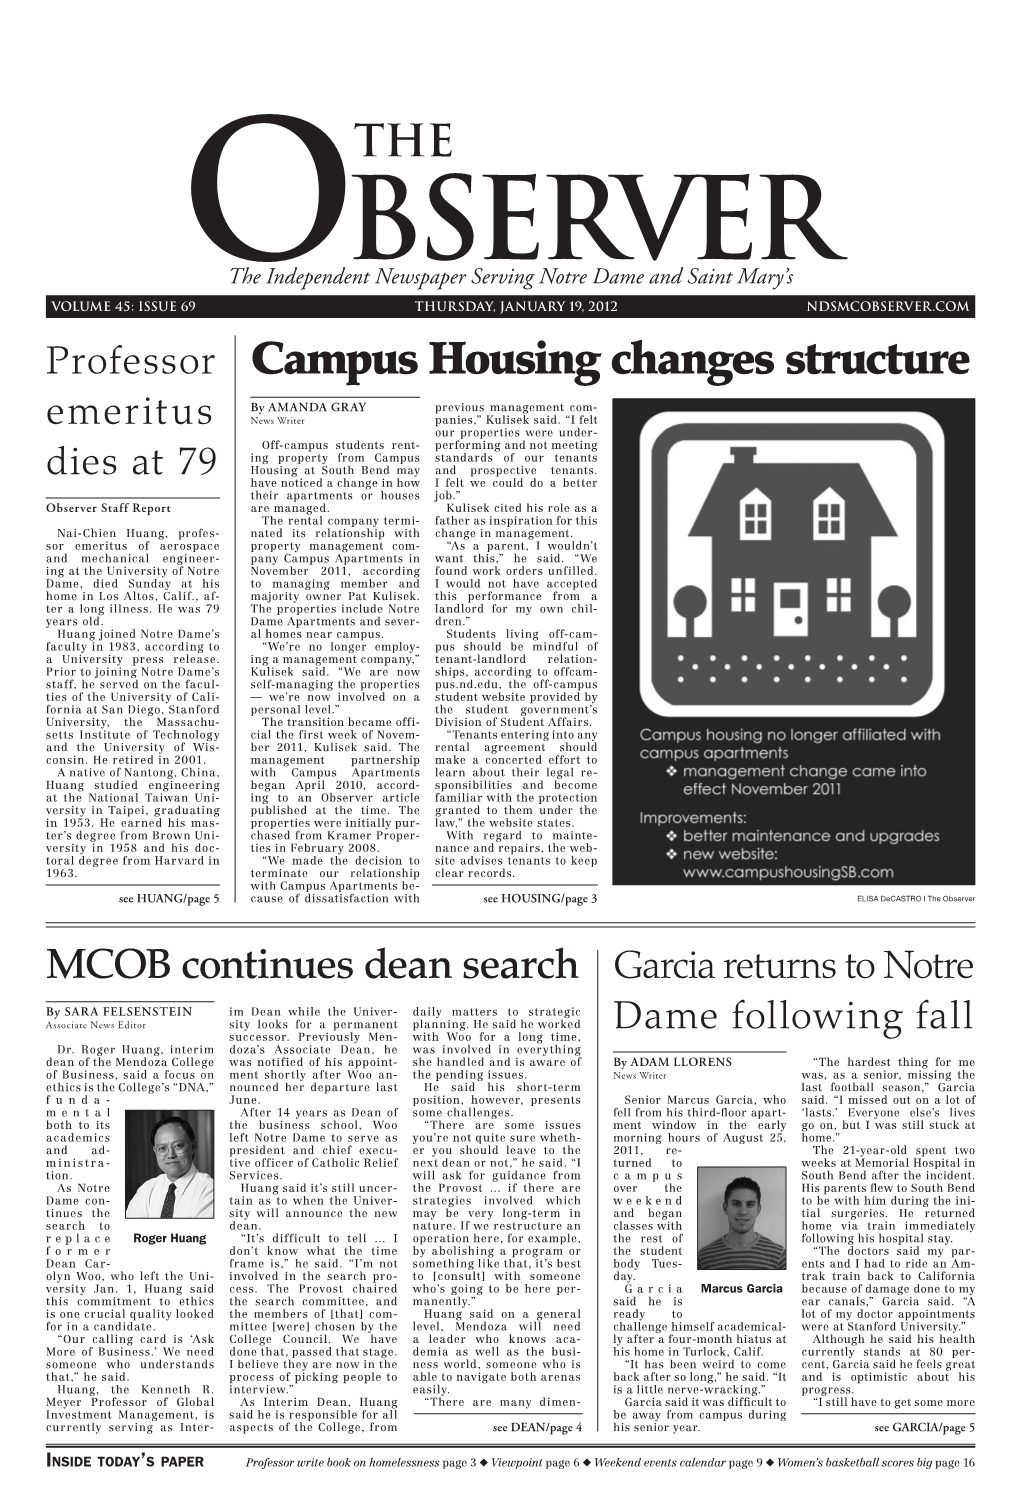 Campus Housing Changes Structure